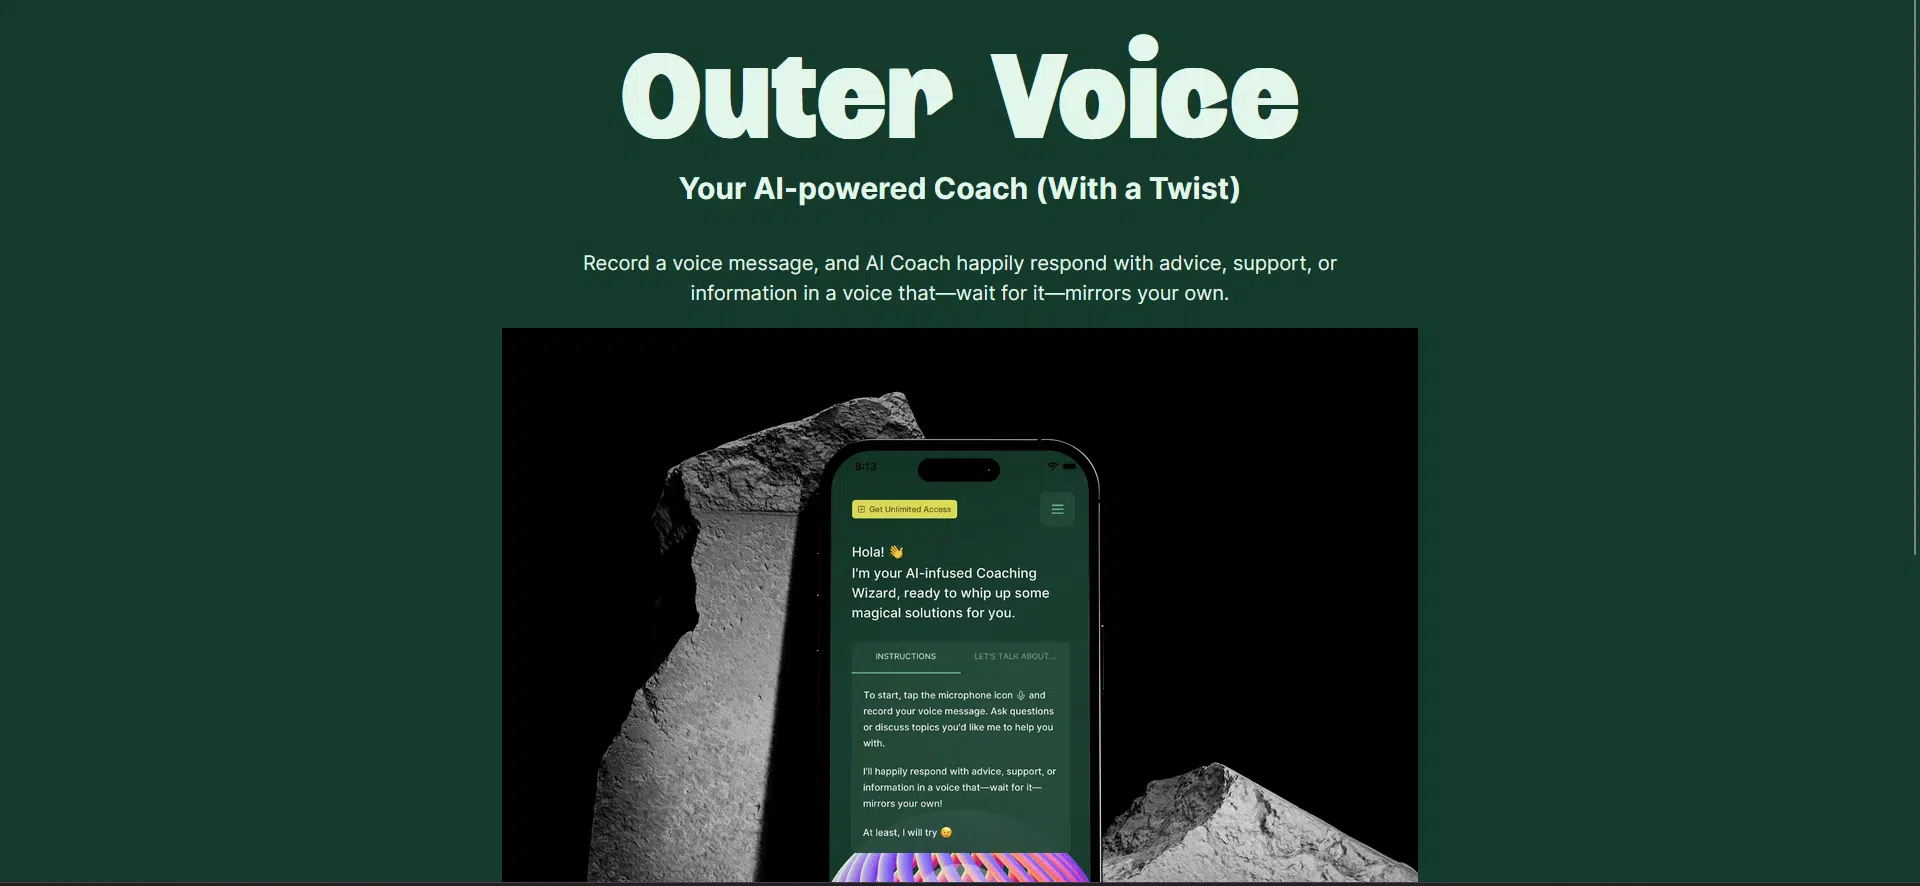 Outer Voice AIwebsite picture